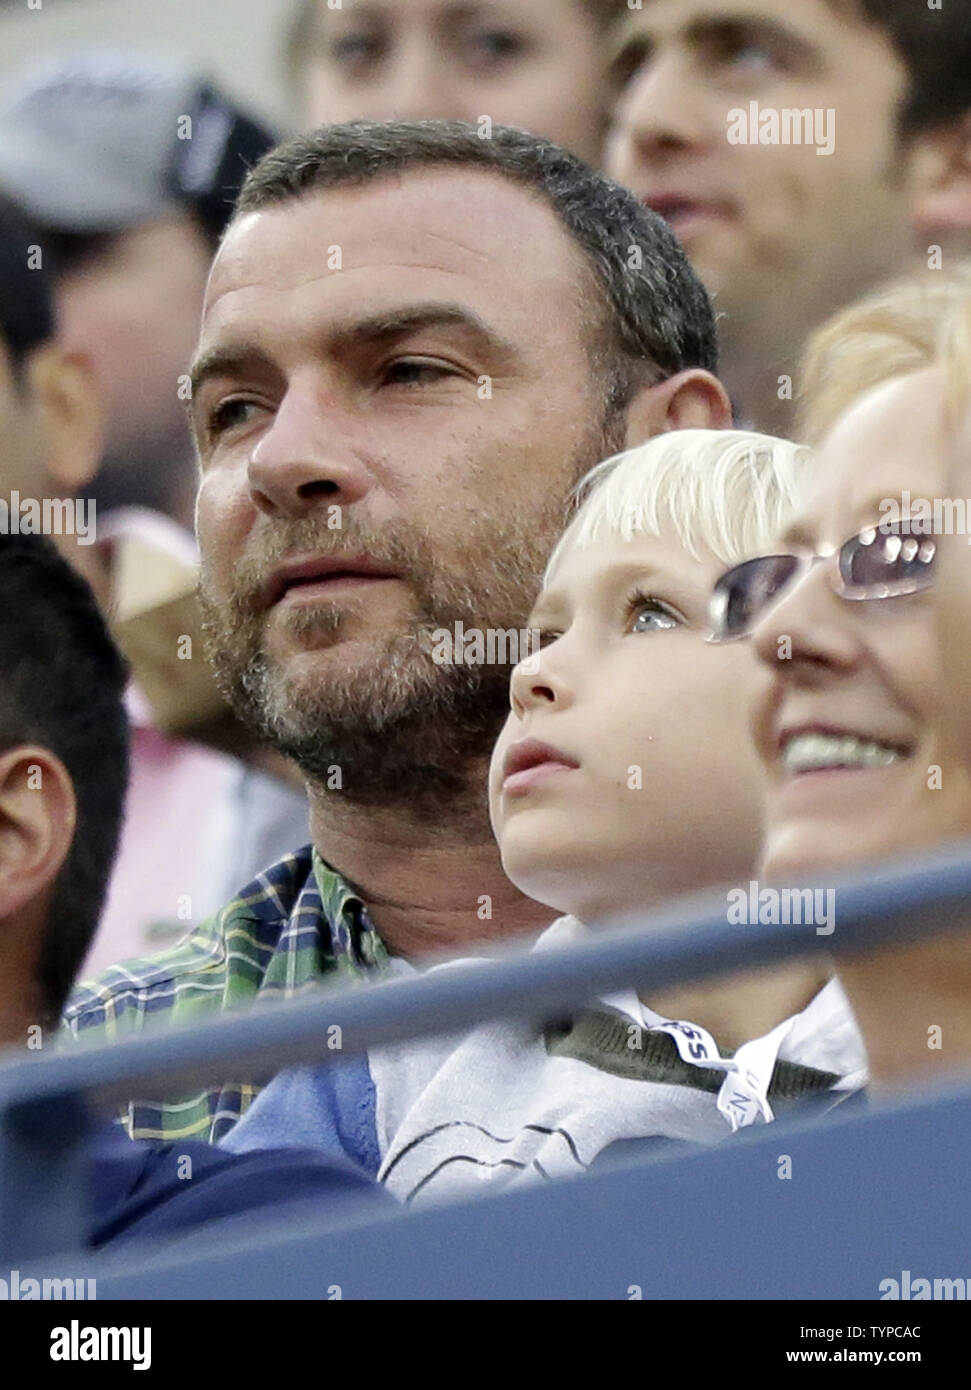 Liev Schreiber and his son Samuel Schreiber watch Kei Nishikori of Japan play Marin Cilic of Croatia in the Men's Final in Arthur Ashe Stadium at the US Open Tennis Championships at the USTA Billie Jean King National Tennis Center in New York City on September 8, 2014. Cilic defeated Nishikori 6-3, 6-3, 6-3 to win his first US Open Championship.       UPI/John Angelillo Stock Photo